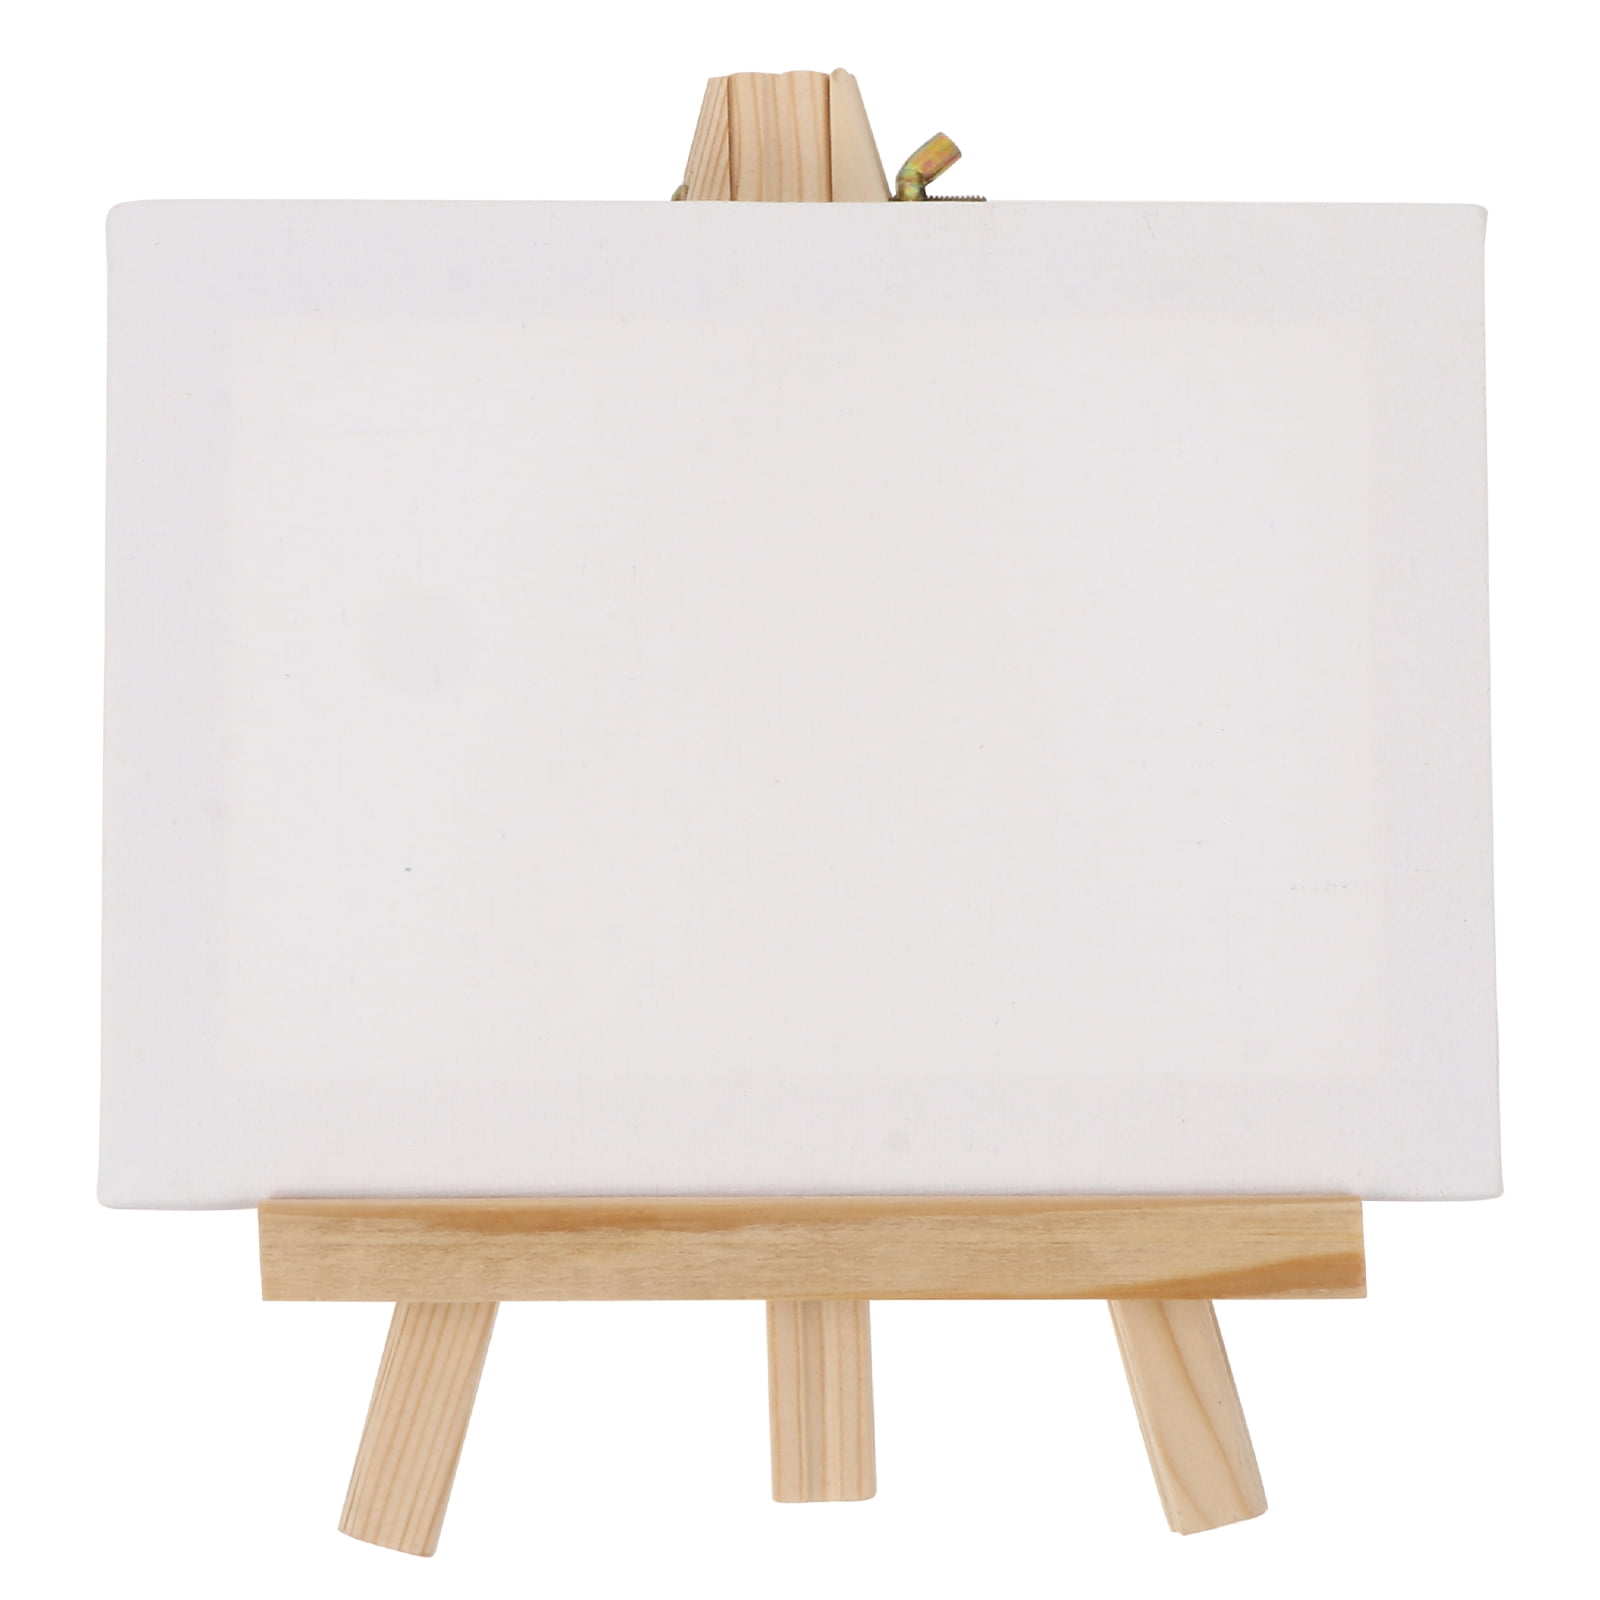  COHEALI 10 Sets Mini Frame Mini Painting Boards Canvas with  Easel Stretched Canvases Canvases Paint Easel for Canvas Painting Mini  Paint Canvas Large Easel Travel Cloth Sketchbook Blank : Office Products